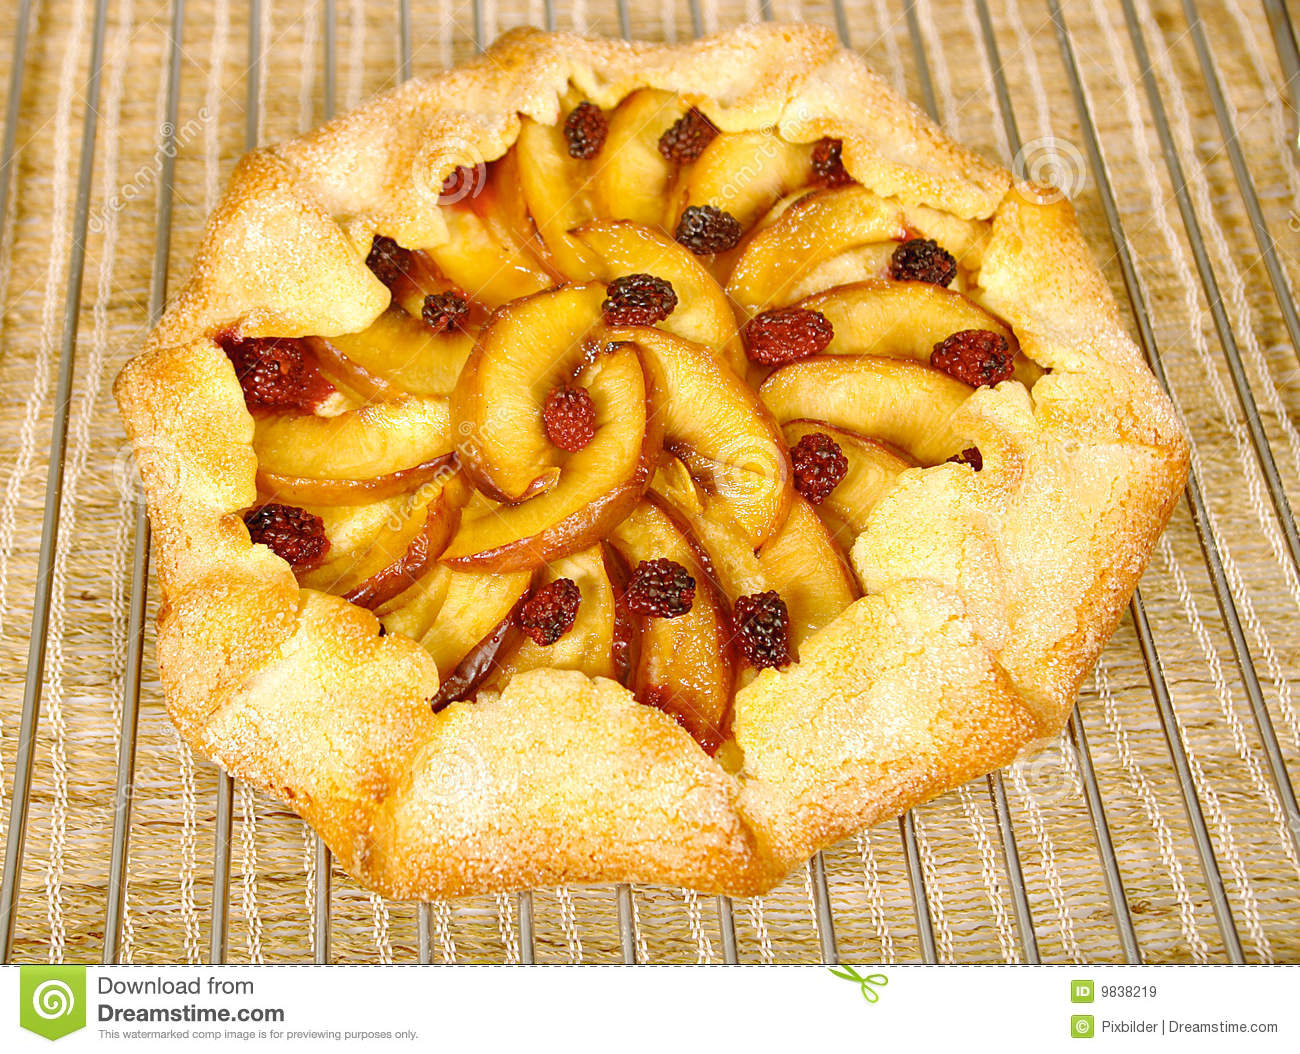 Apple And Blackberry Pie Royalty Free Stock Images   Image  9838219